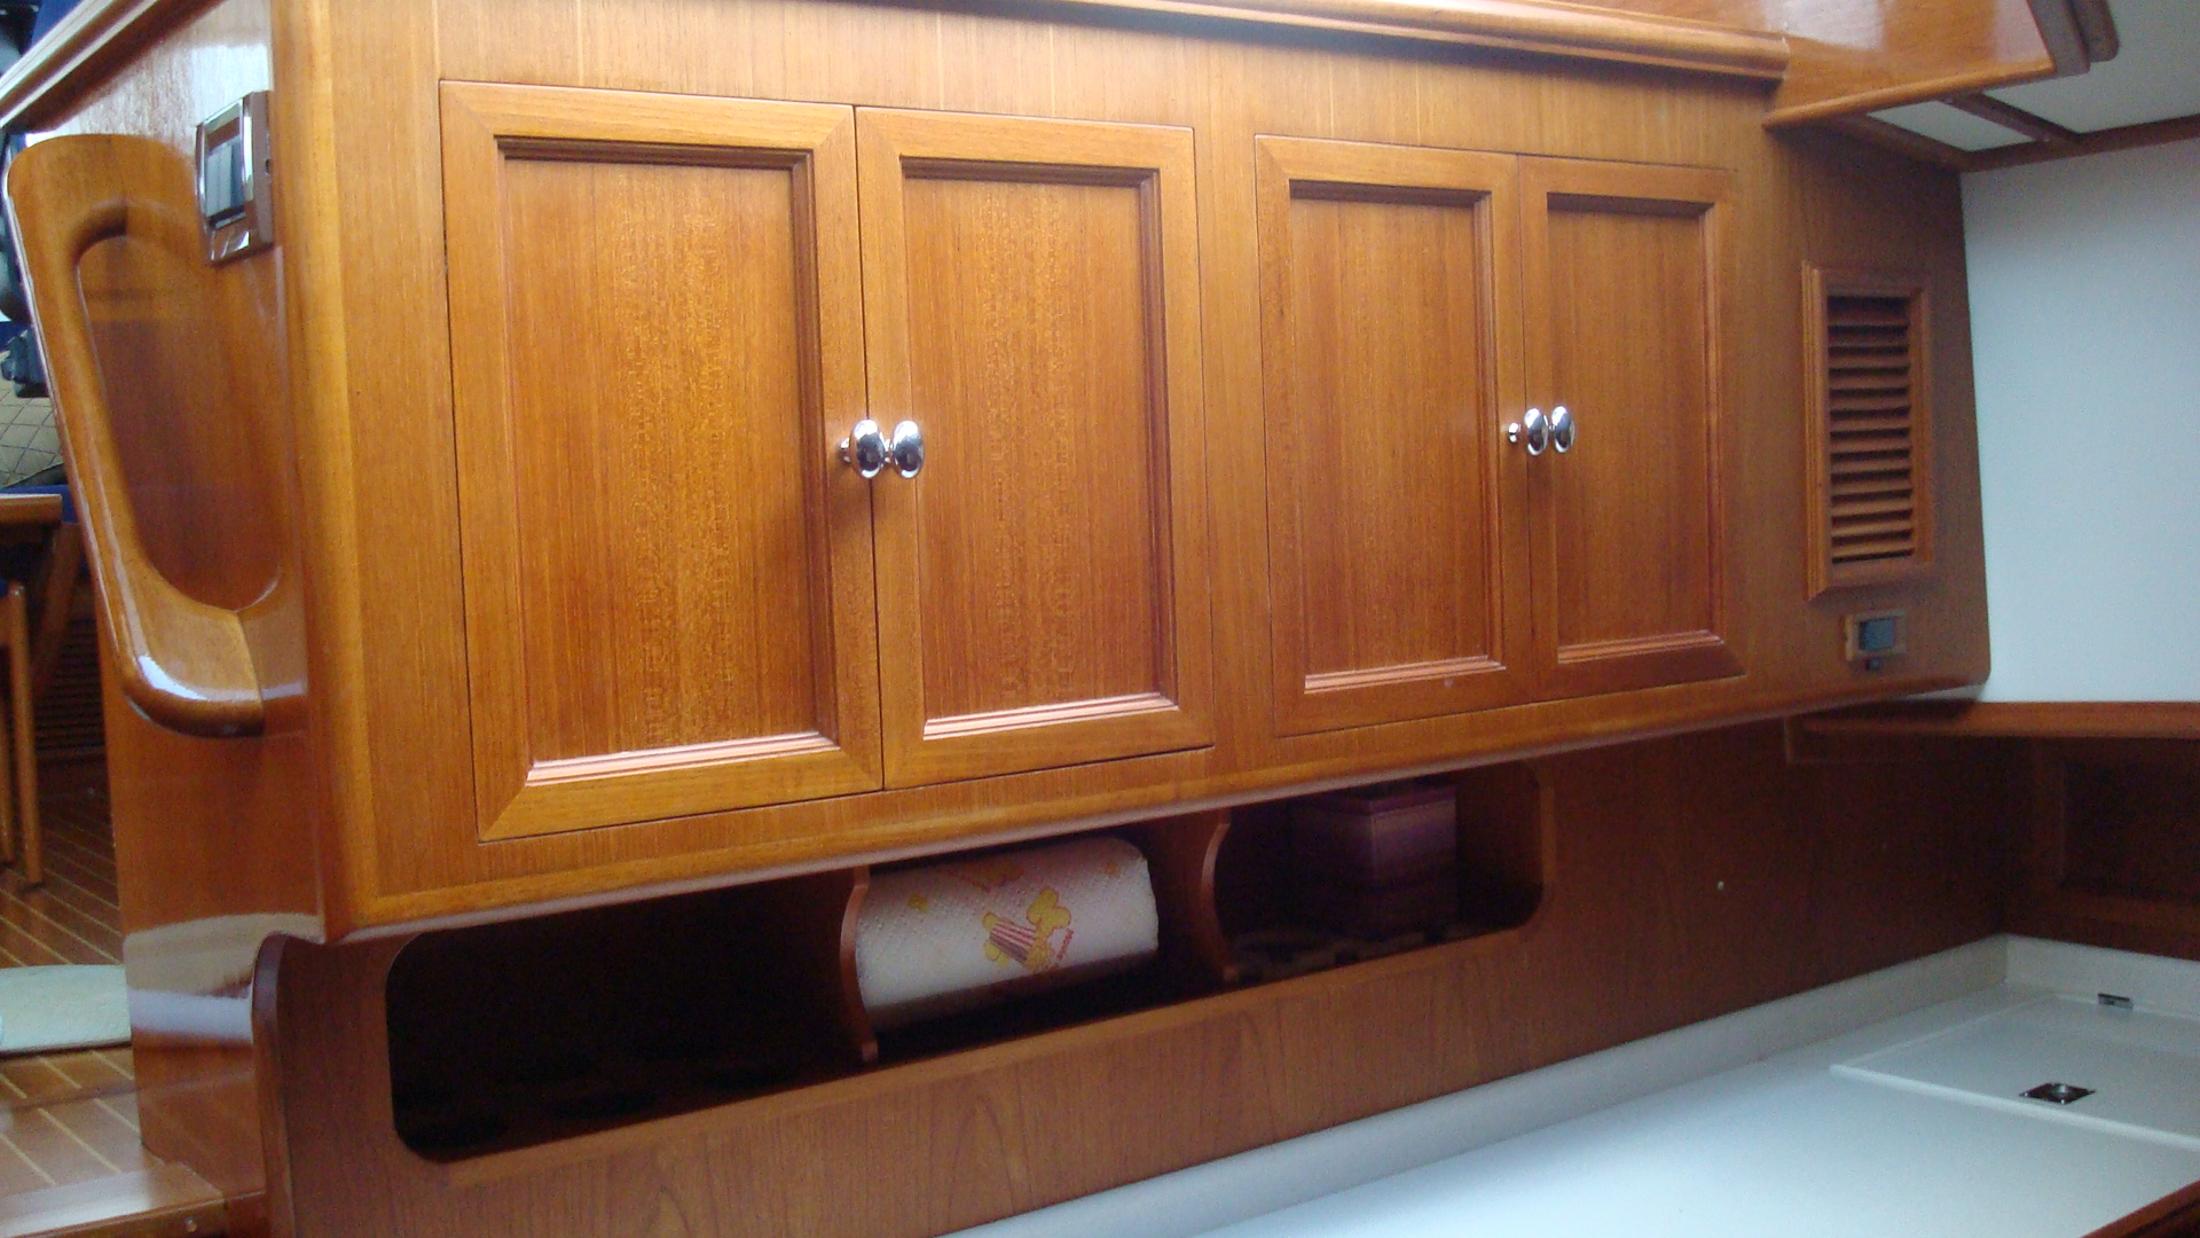 Upper Aft Galley Cabinets